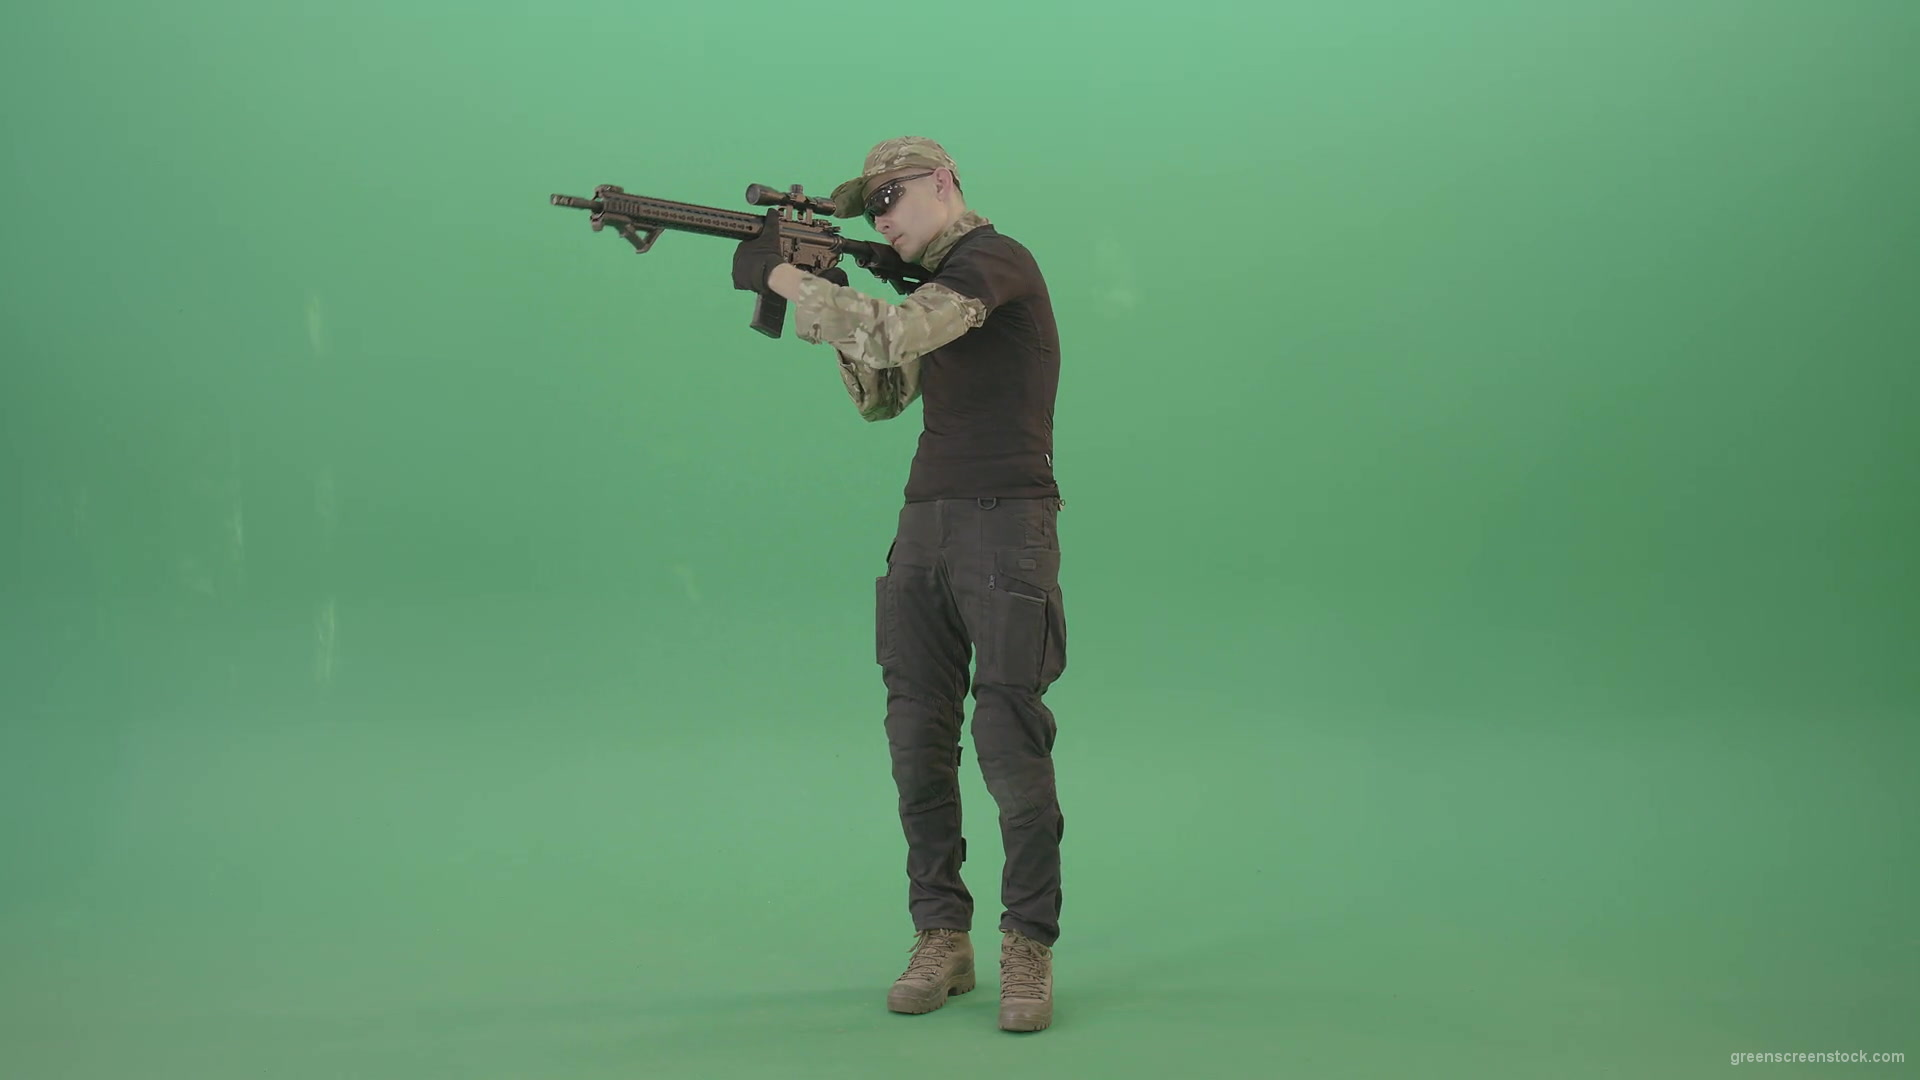 Man-in-Military-uniform-shooting-with-Army-machine-gun-isolated-on-Green-Screen-4K-Video-Footage-1920_004 Green Screen Stock